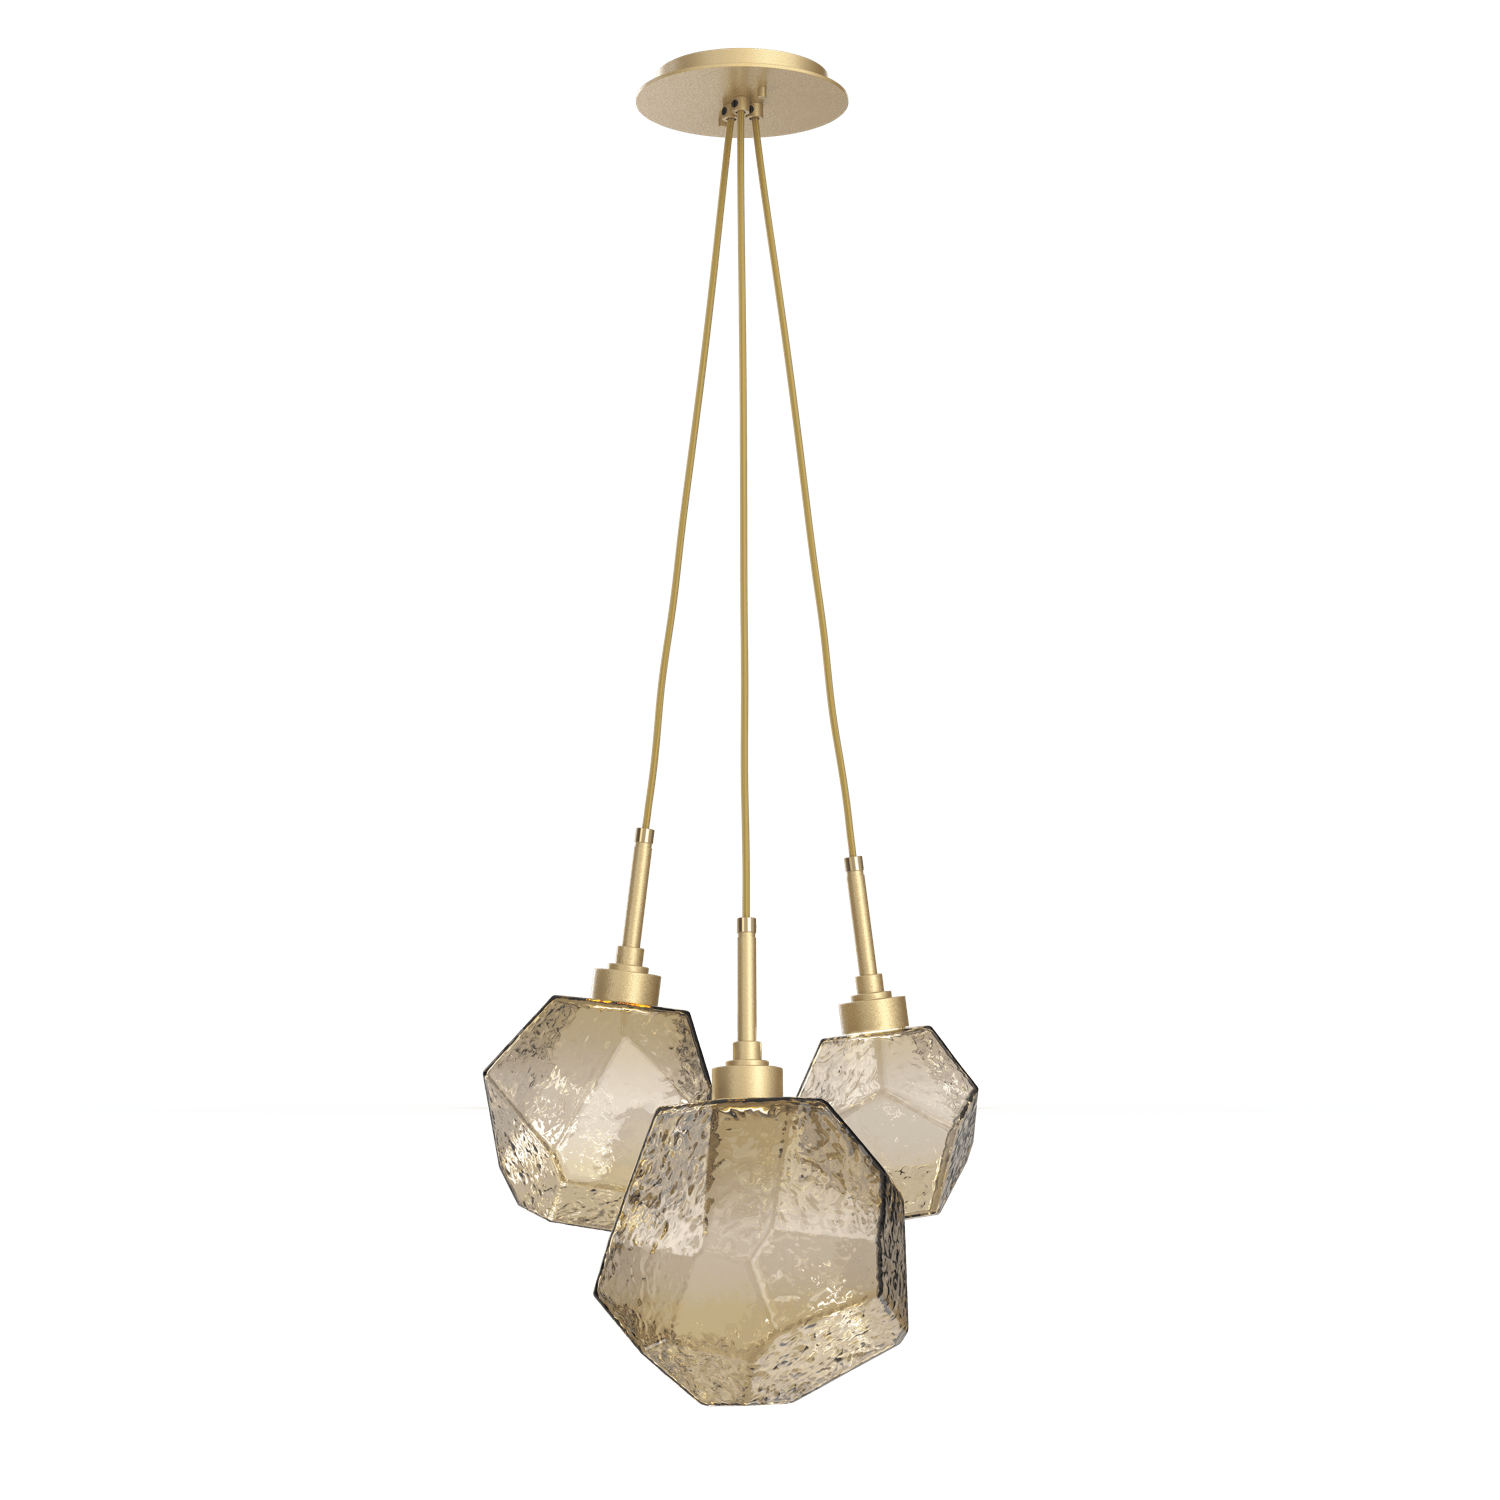 CHB0039-0E-GB-B-Hammerton-Studio-Gem-3-light-cluster-pendant-light-with-gilded-brass-finish-and-bronze-blown-glass-shades-and-LED-lamping